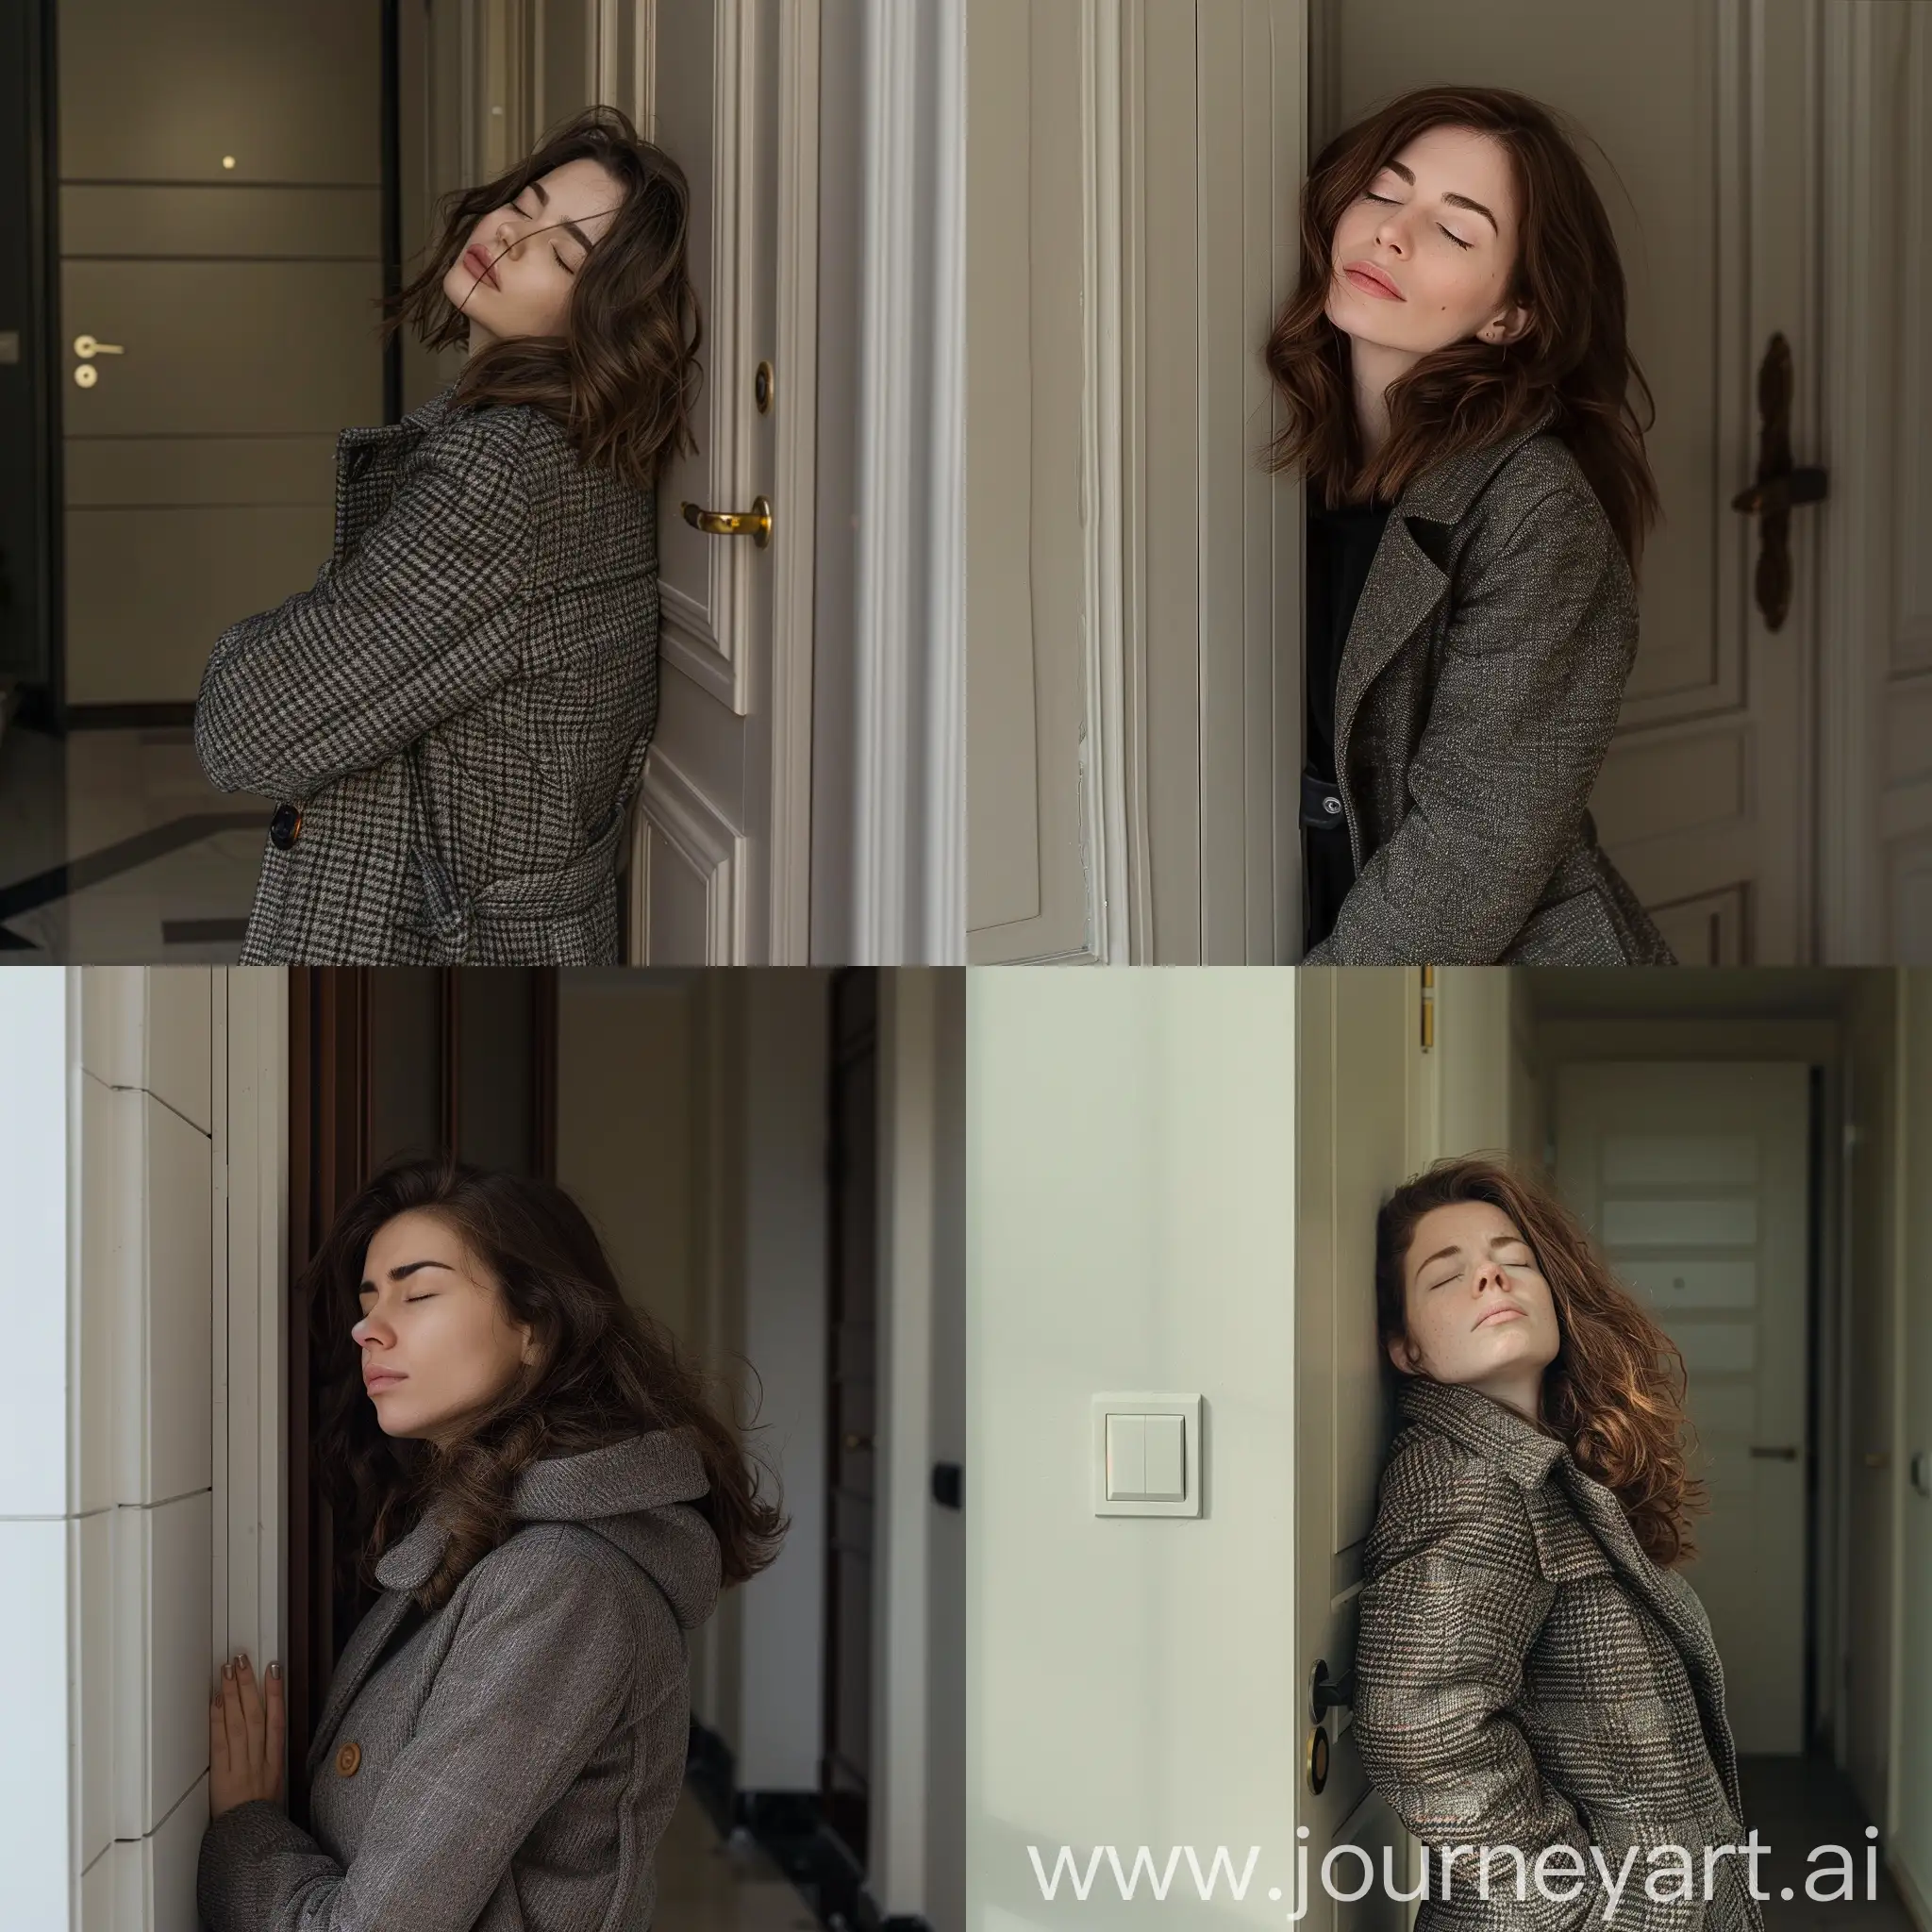 Waist-high photo, a woman with a very tired expression, in a coat, a brown-haired woman with closed eyes stands facing the camera, leaning back against the closed front door in the apartment, modern interior